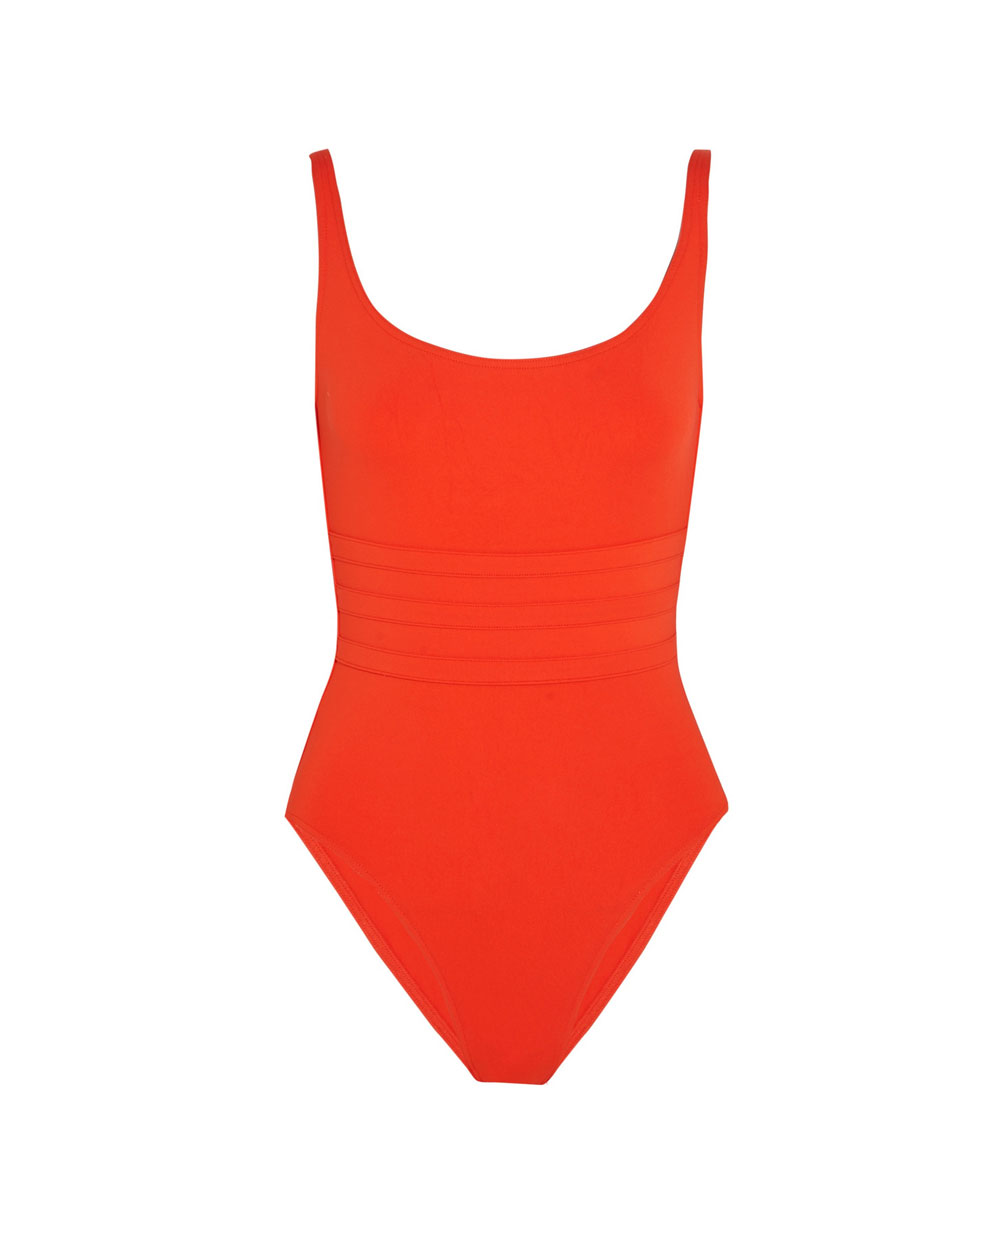 THE ONE PIECE: Eres, $616 from Net-a-Porter